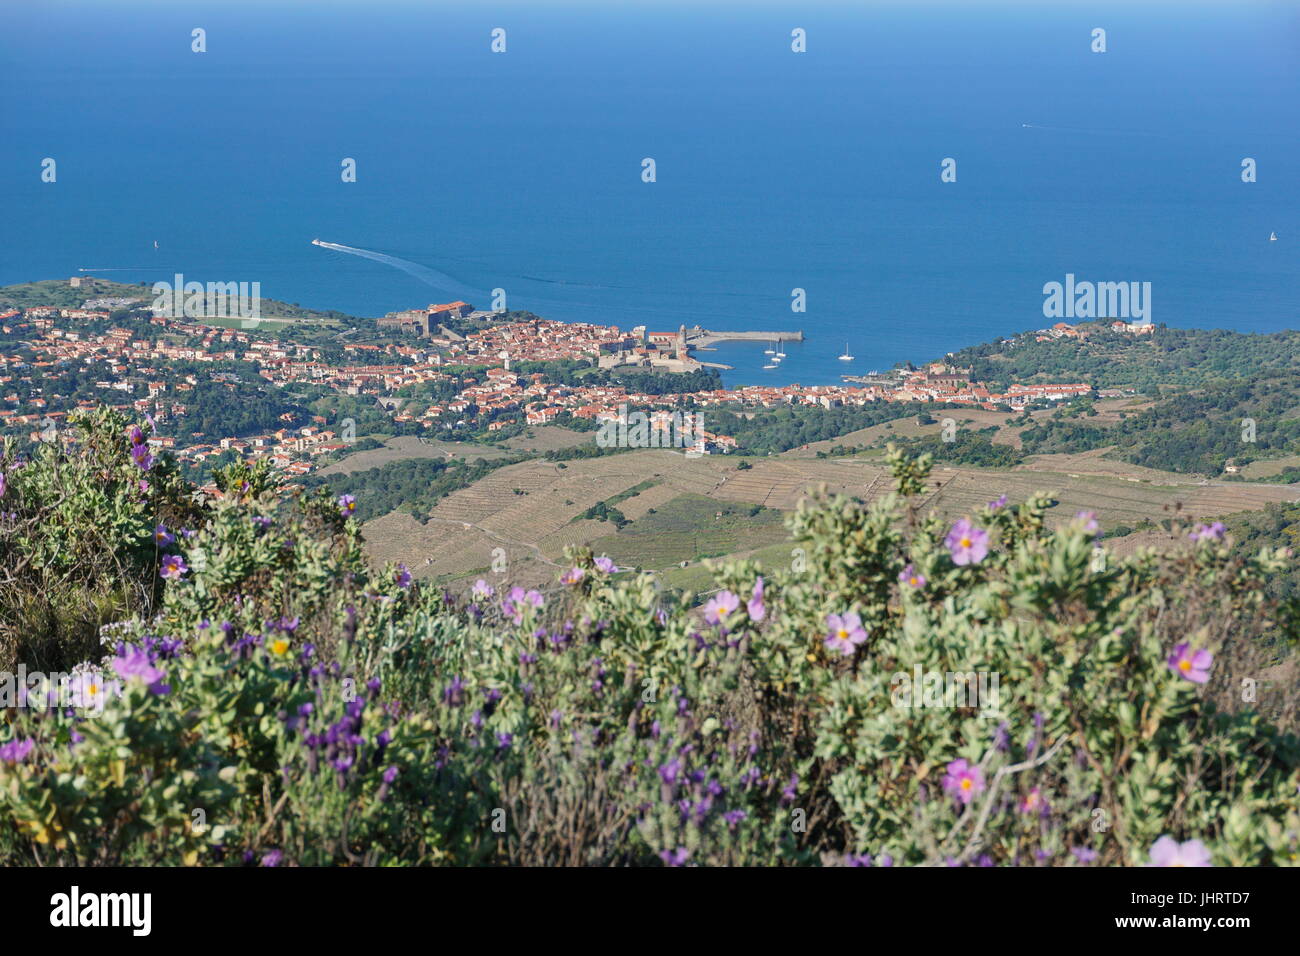 Coastal village landscape Collioure on the shore of the Mediterranean sea, seen from the heights, France, Roussillon, Pyrenees Orientales Stock Photo